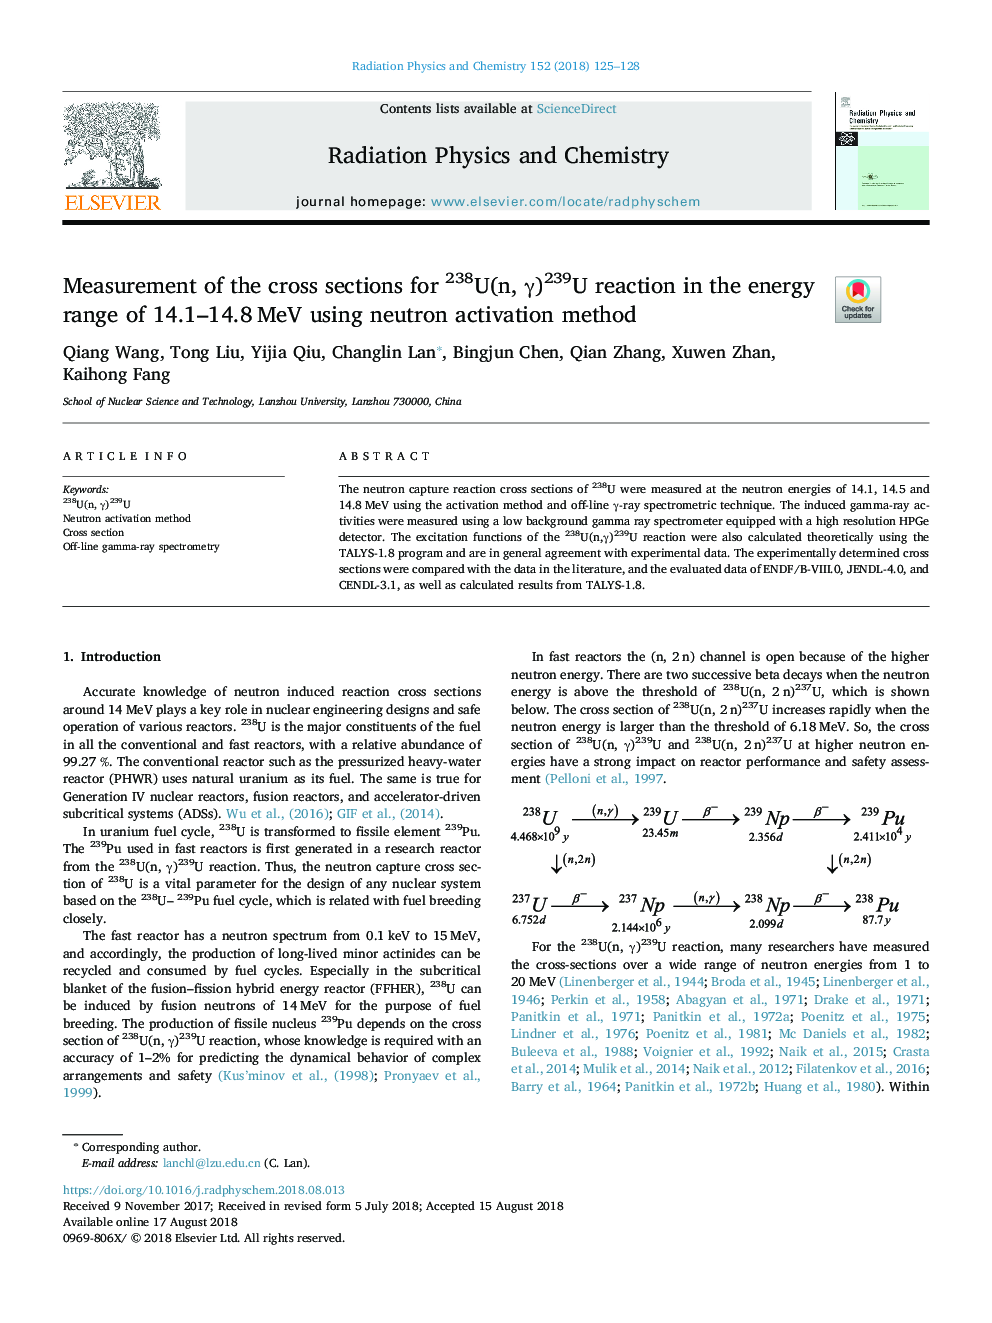 Measurement of the cross sections for 238U(n, Î³)239U reaction in the energy range of 14.1-14.8â¯MeV using neutron activation method